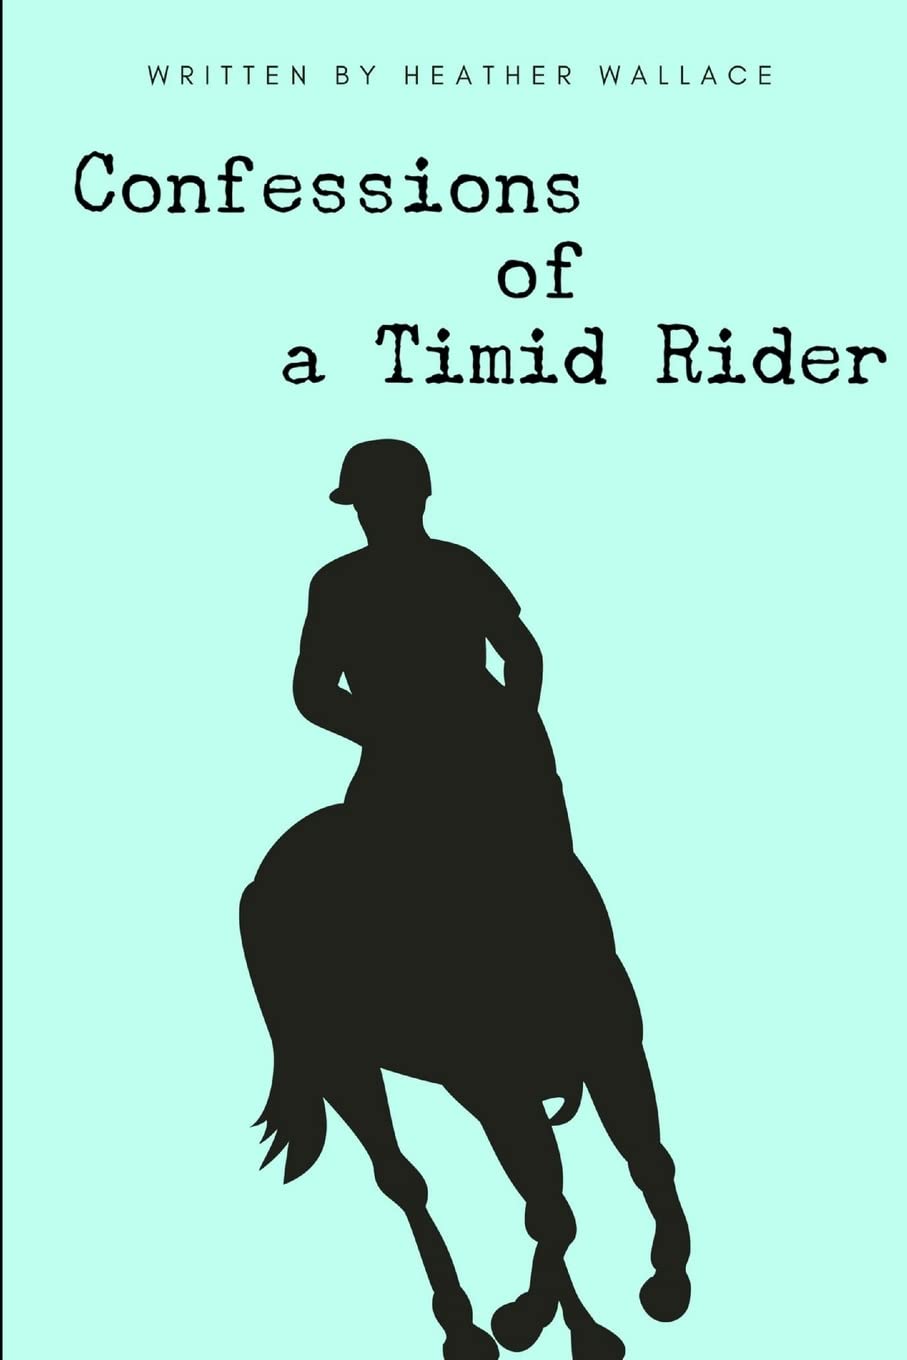 Confessions of a Timid Rider by Heather Wallace